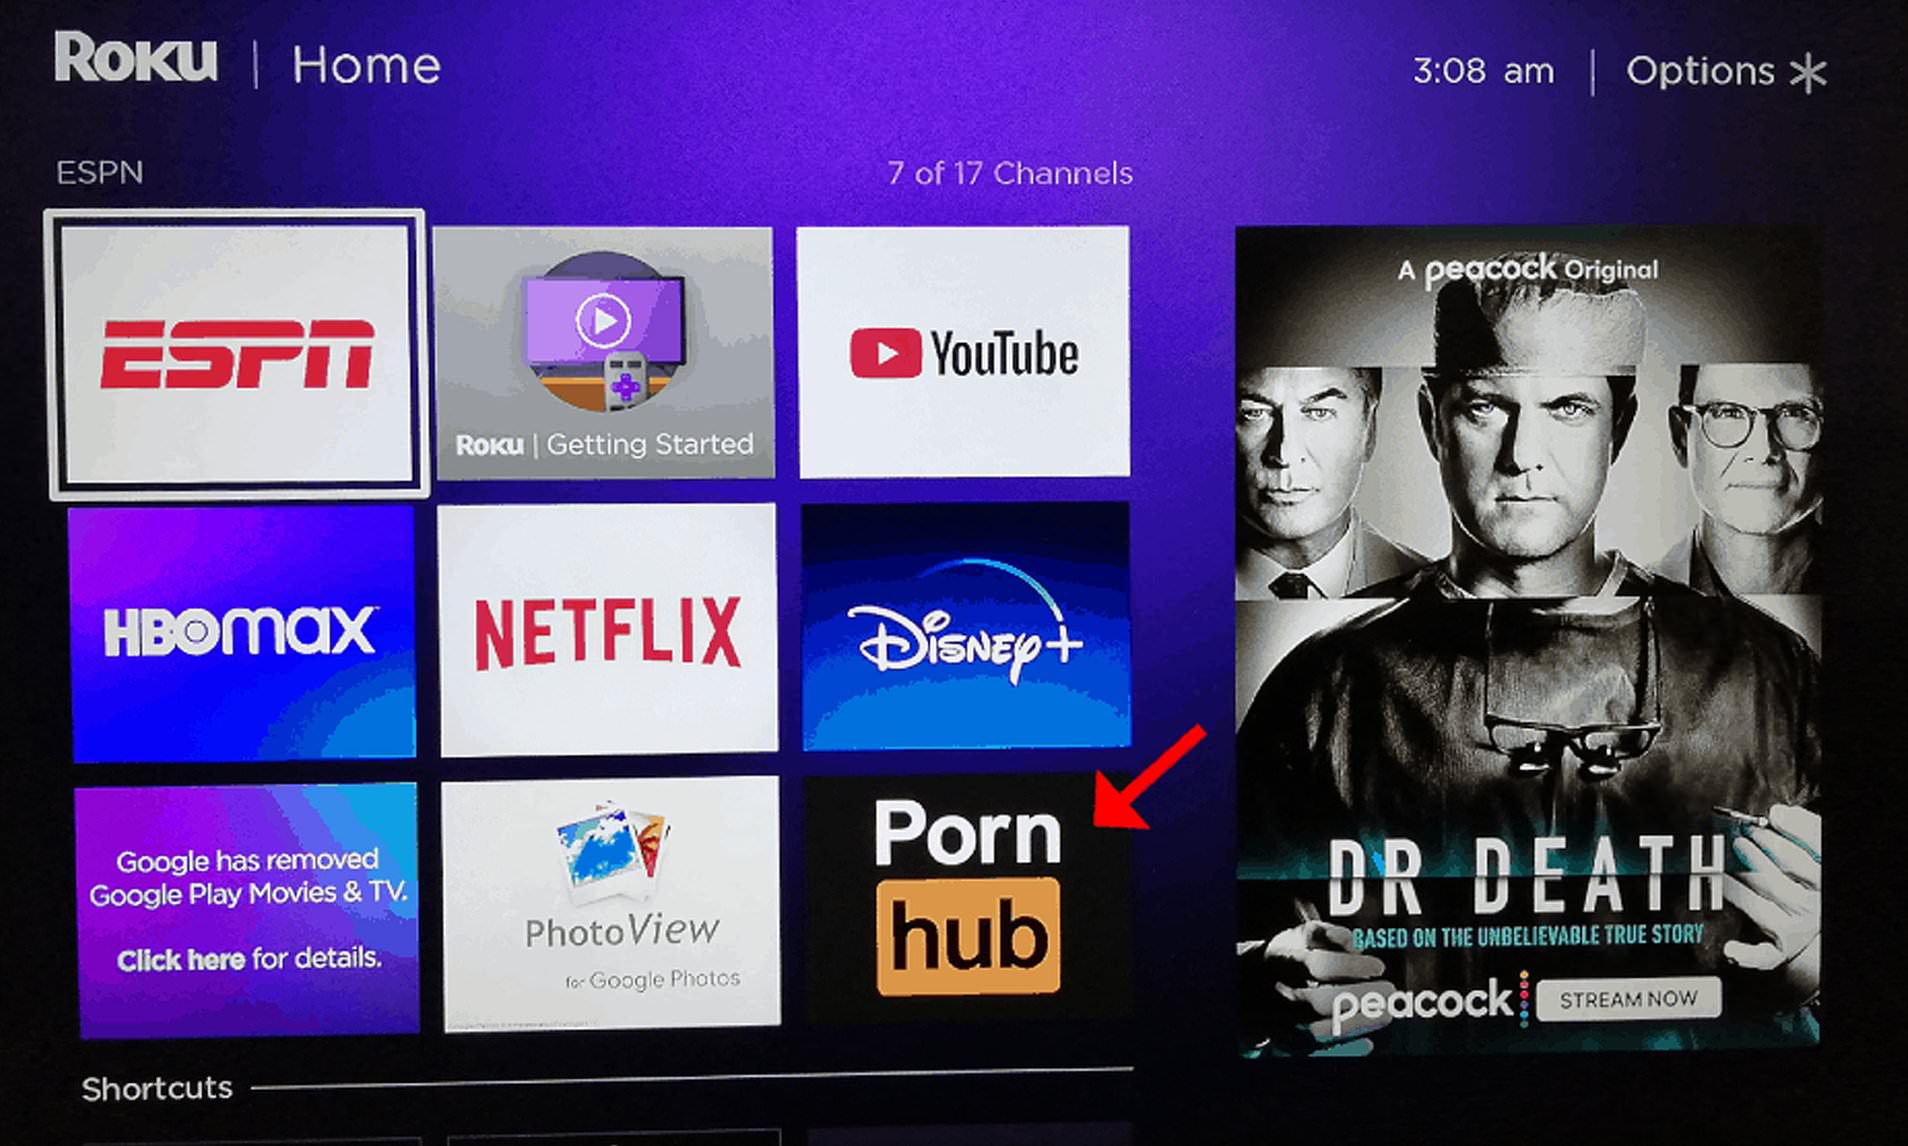 diane shope recommends can you watch porn on roku pic